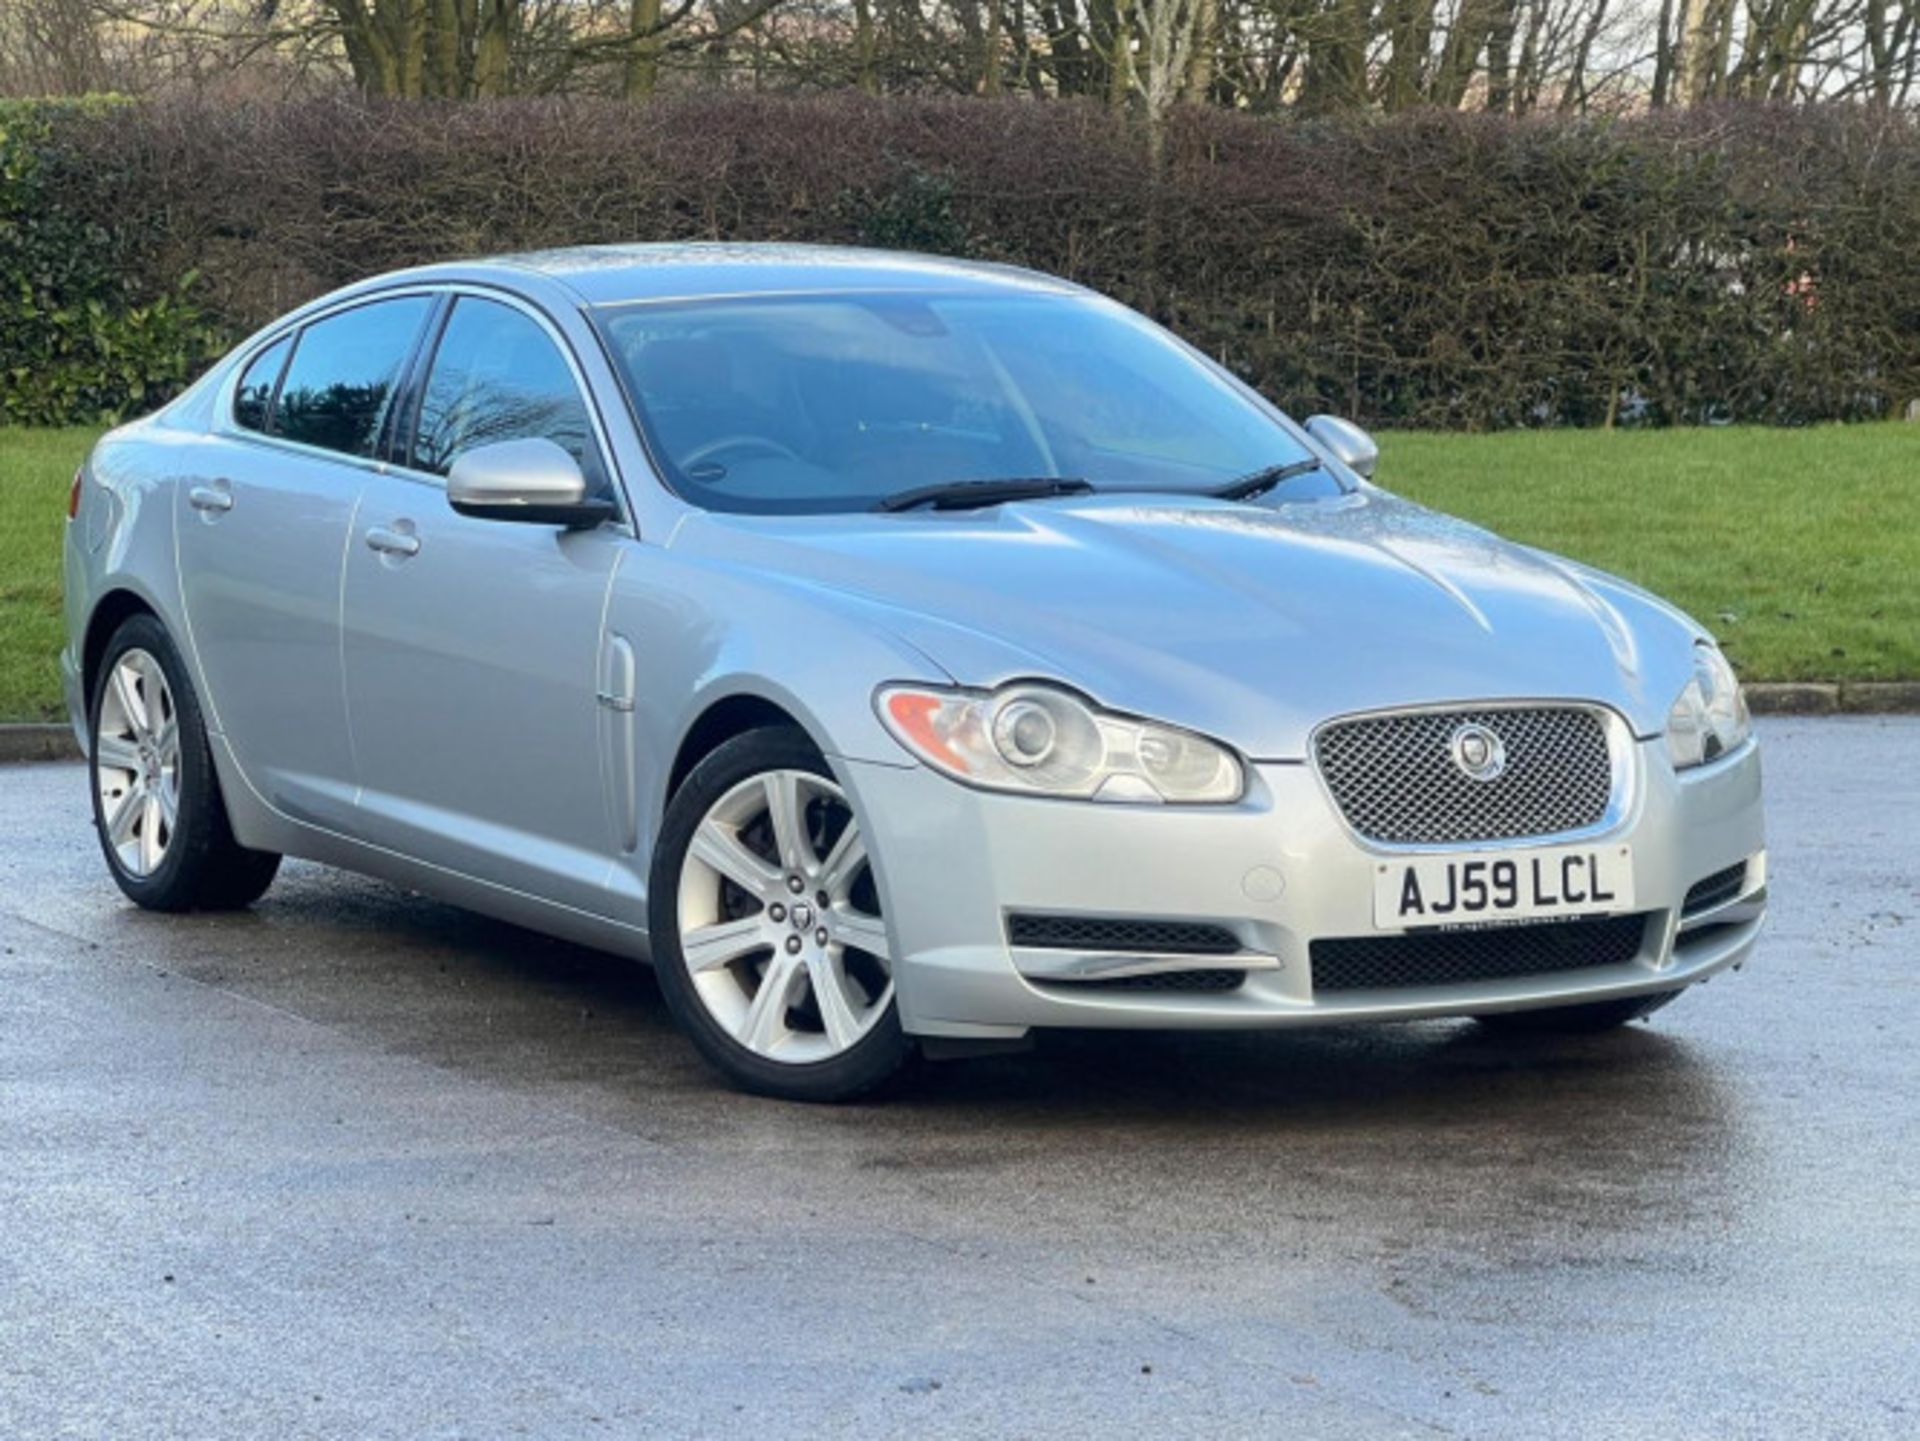 LUXURIOUS JAGUAR XF 3.0D V6 LUXURY 4DR AUTOMATIC SALOON >>--NO VAT ON HAMMER--<< - Image 80 of 80